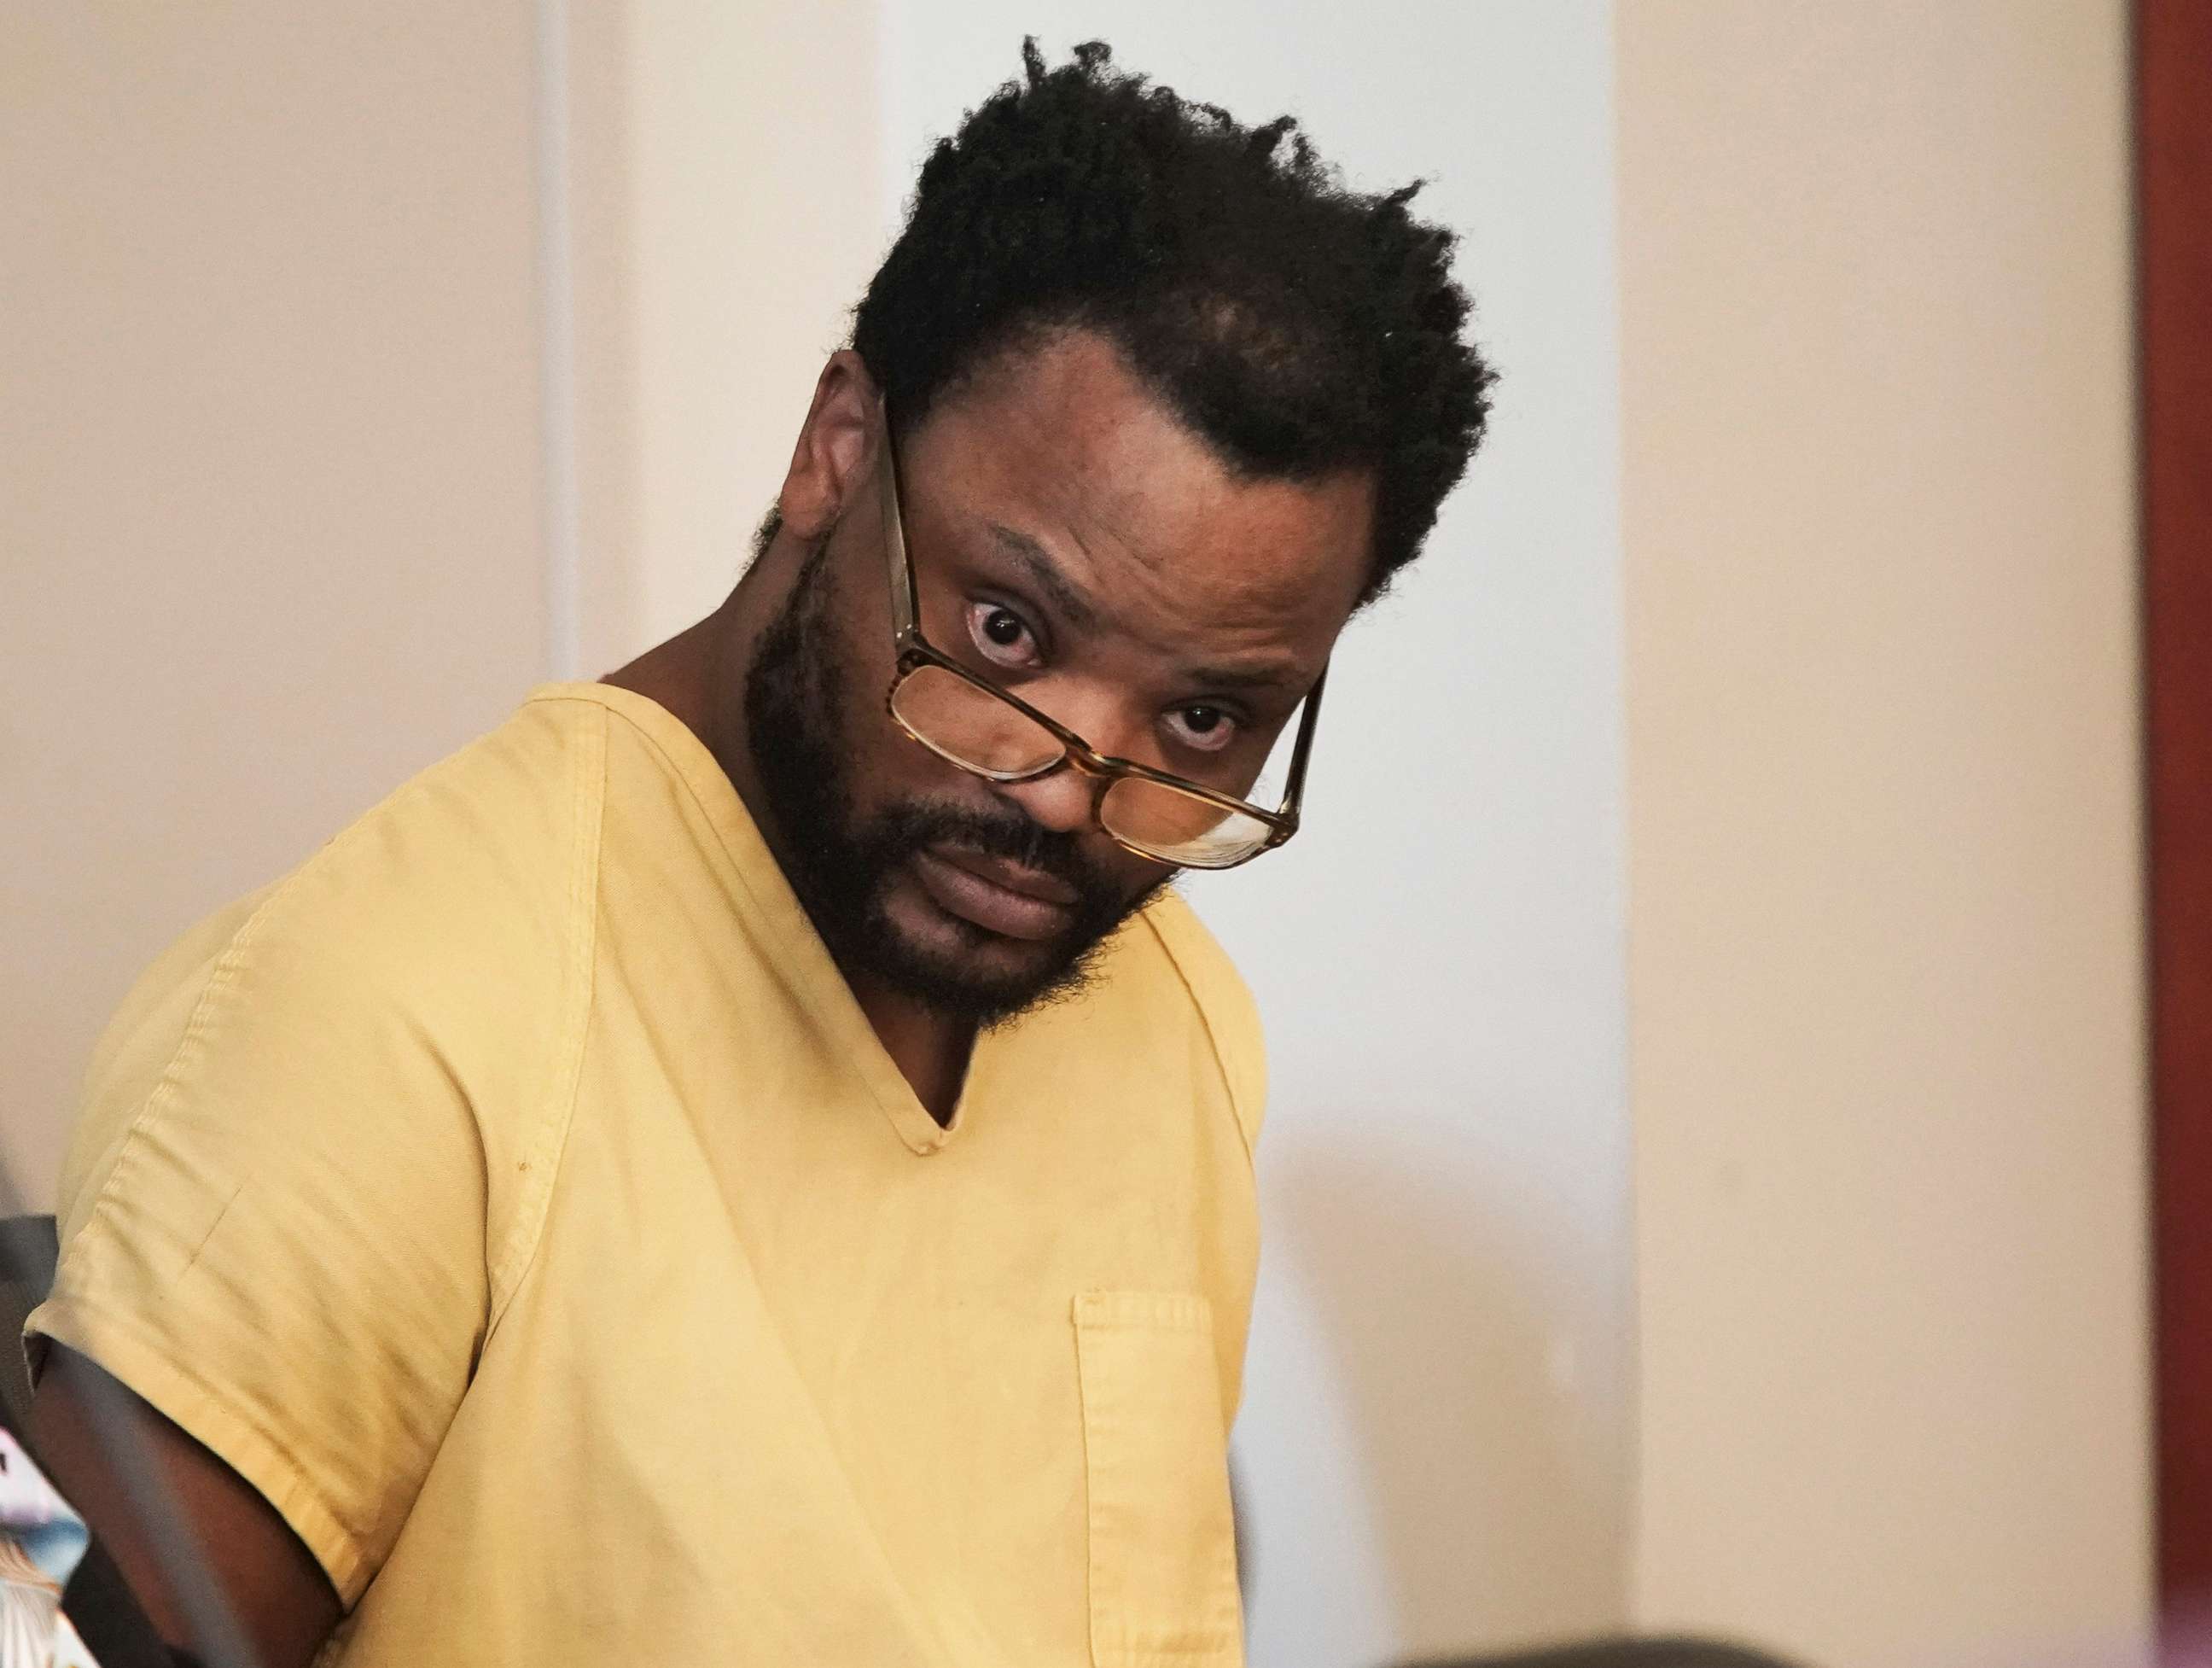 PHOTO: In this Dec. 20, 2019, file photo, Ayoola A. Ajayi appears in 3rd District Court in Salt Lake City.